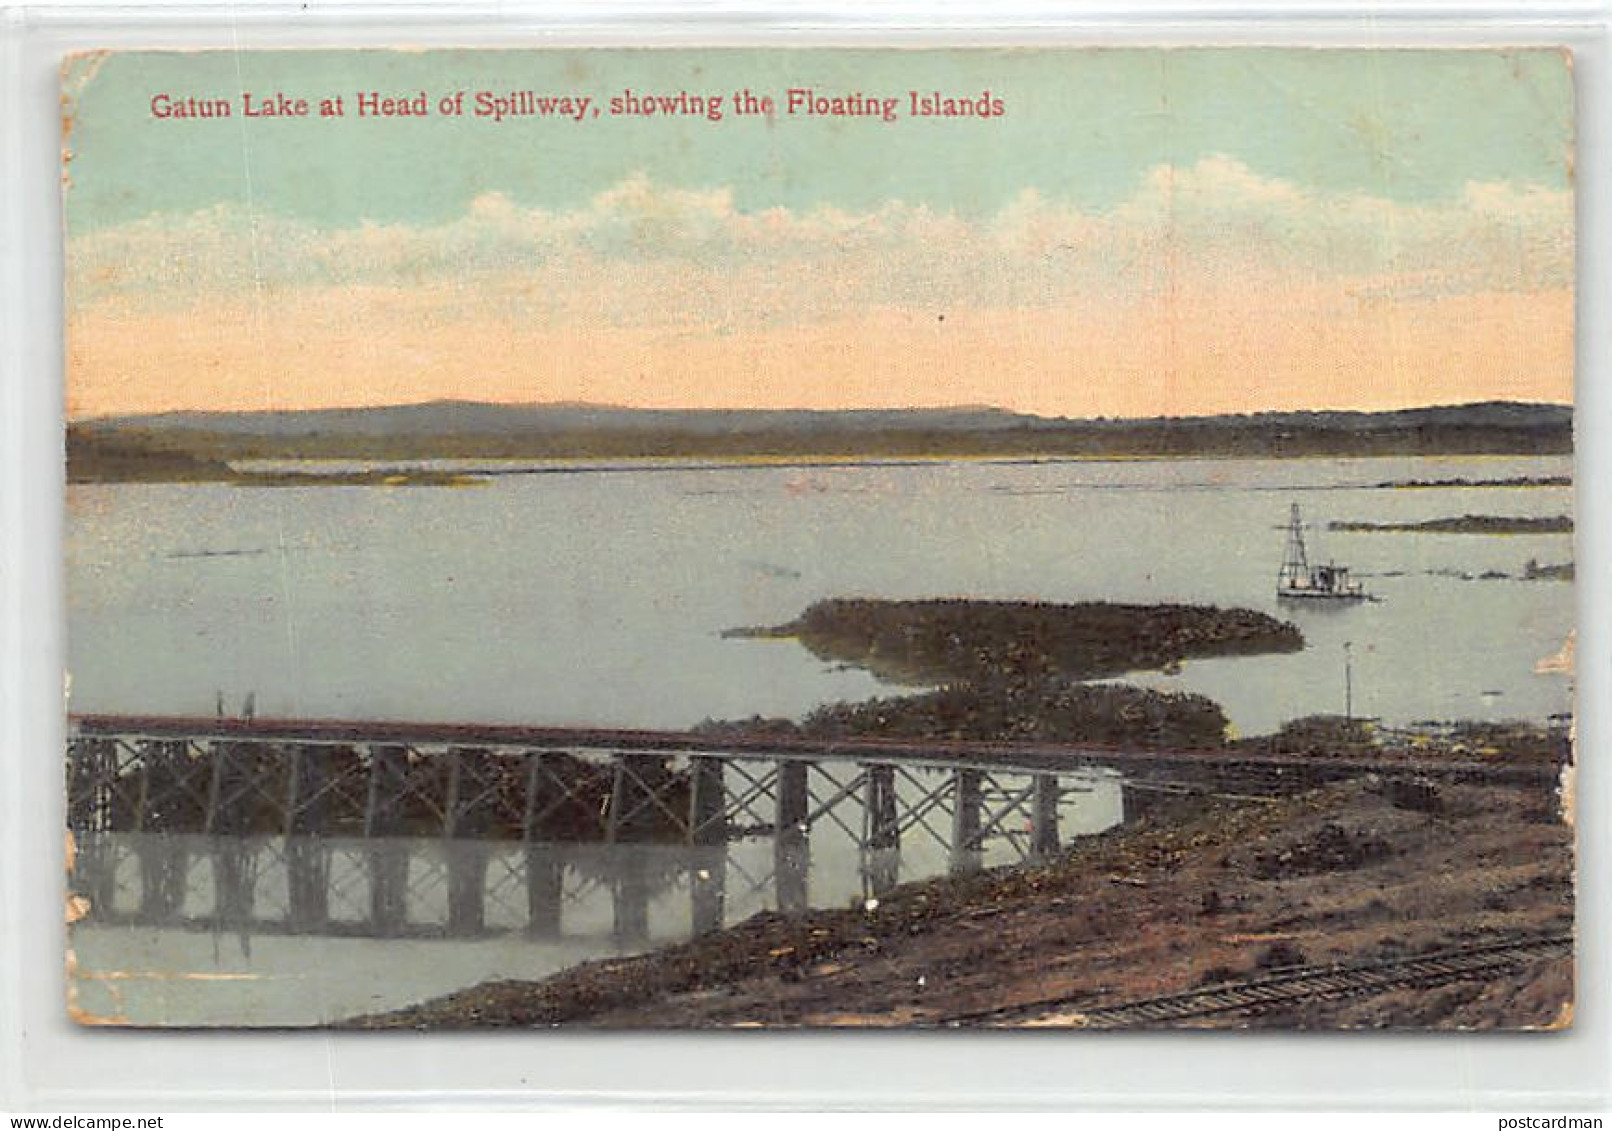 Panama - Gatun Lake At Head Of Spillway, Showing The Floating Islands - Publ. The Leighton & Valentine Co. PC21 - Panama